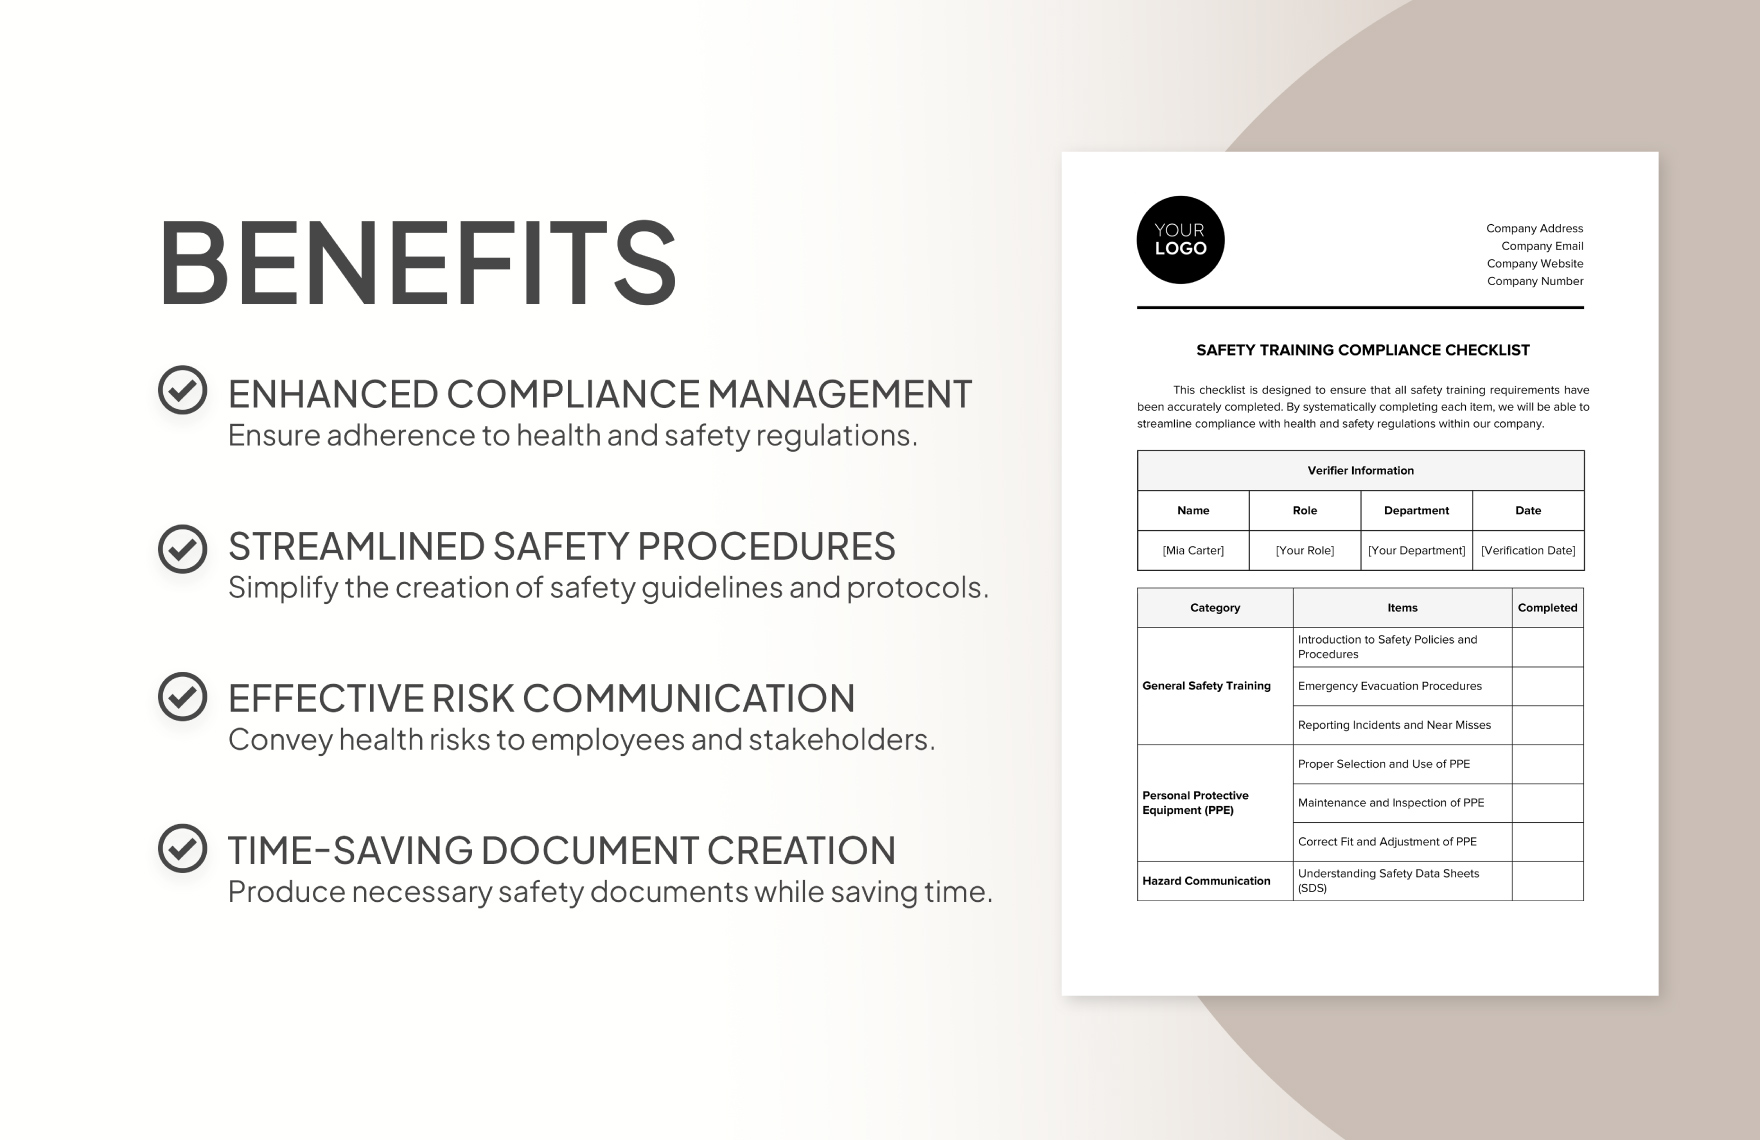 Safety Training Compliance Checklist Template